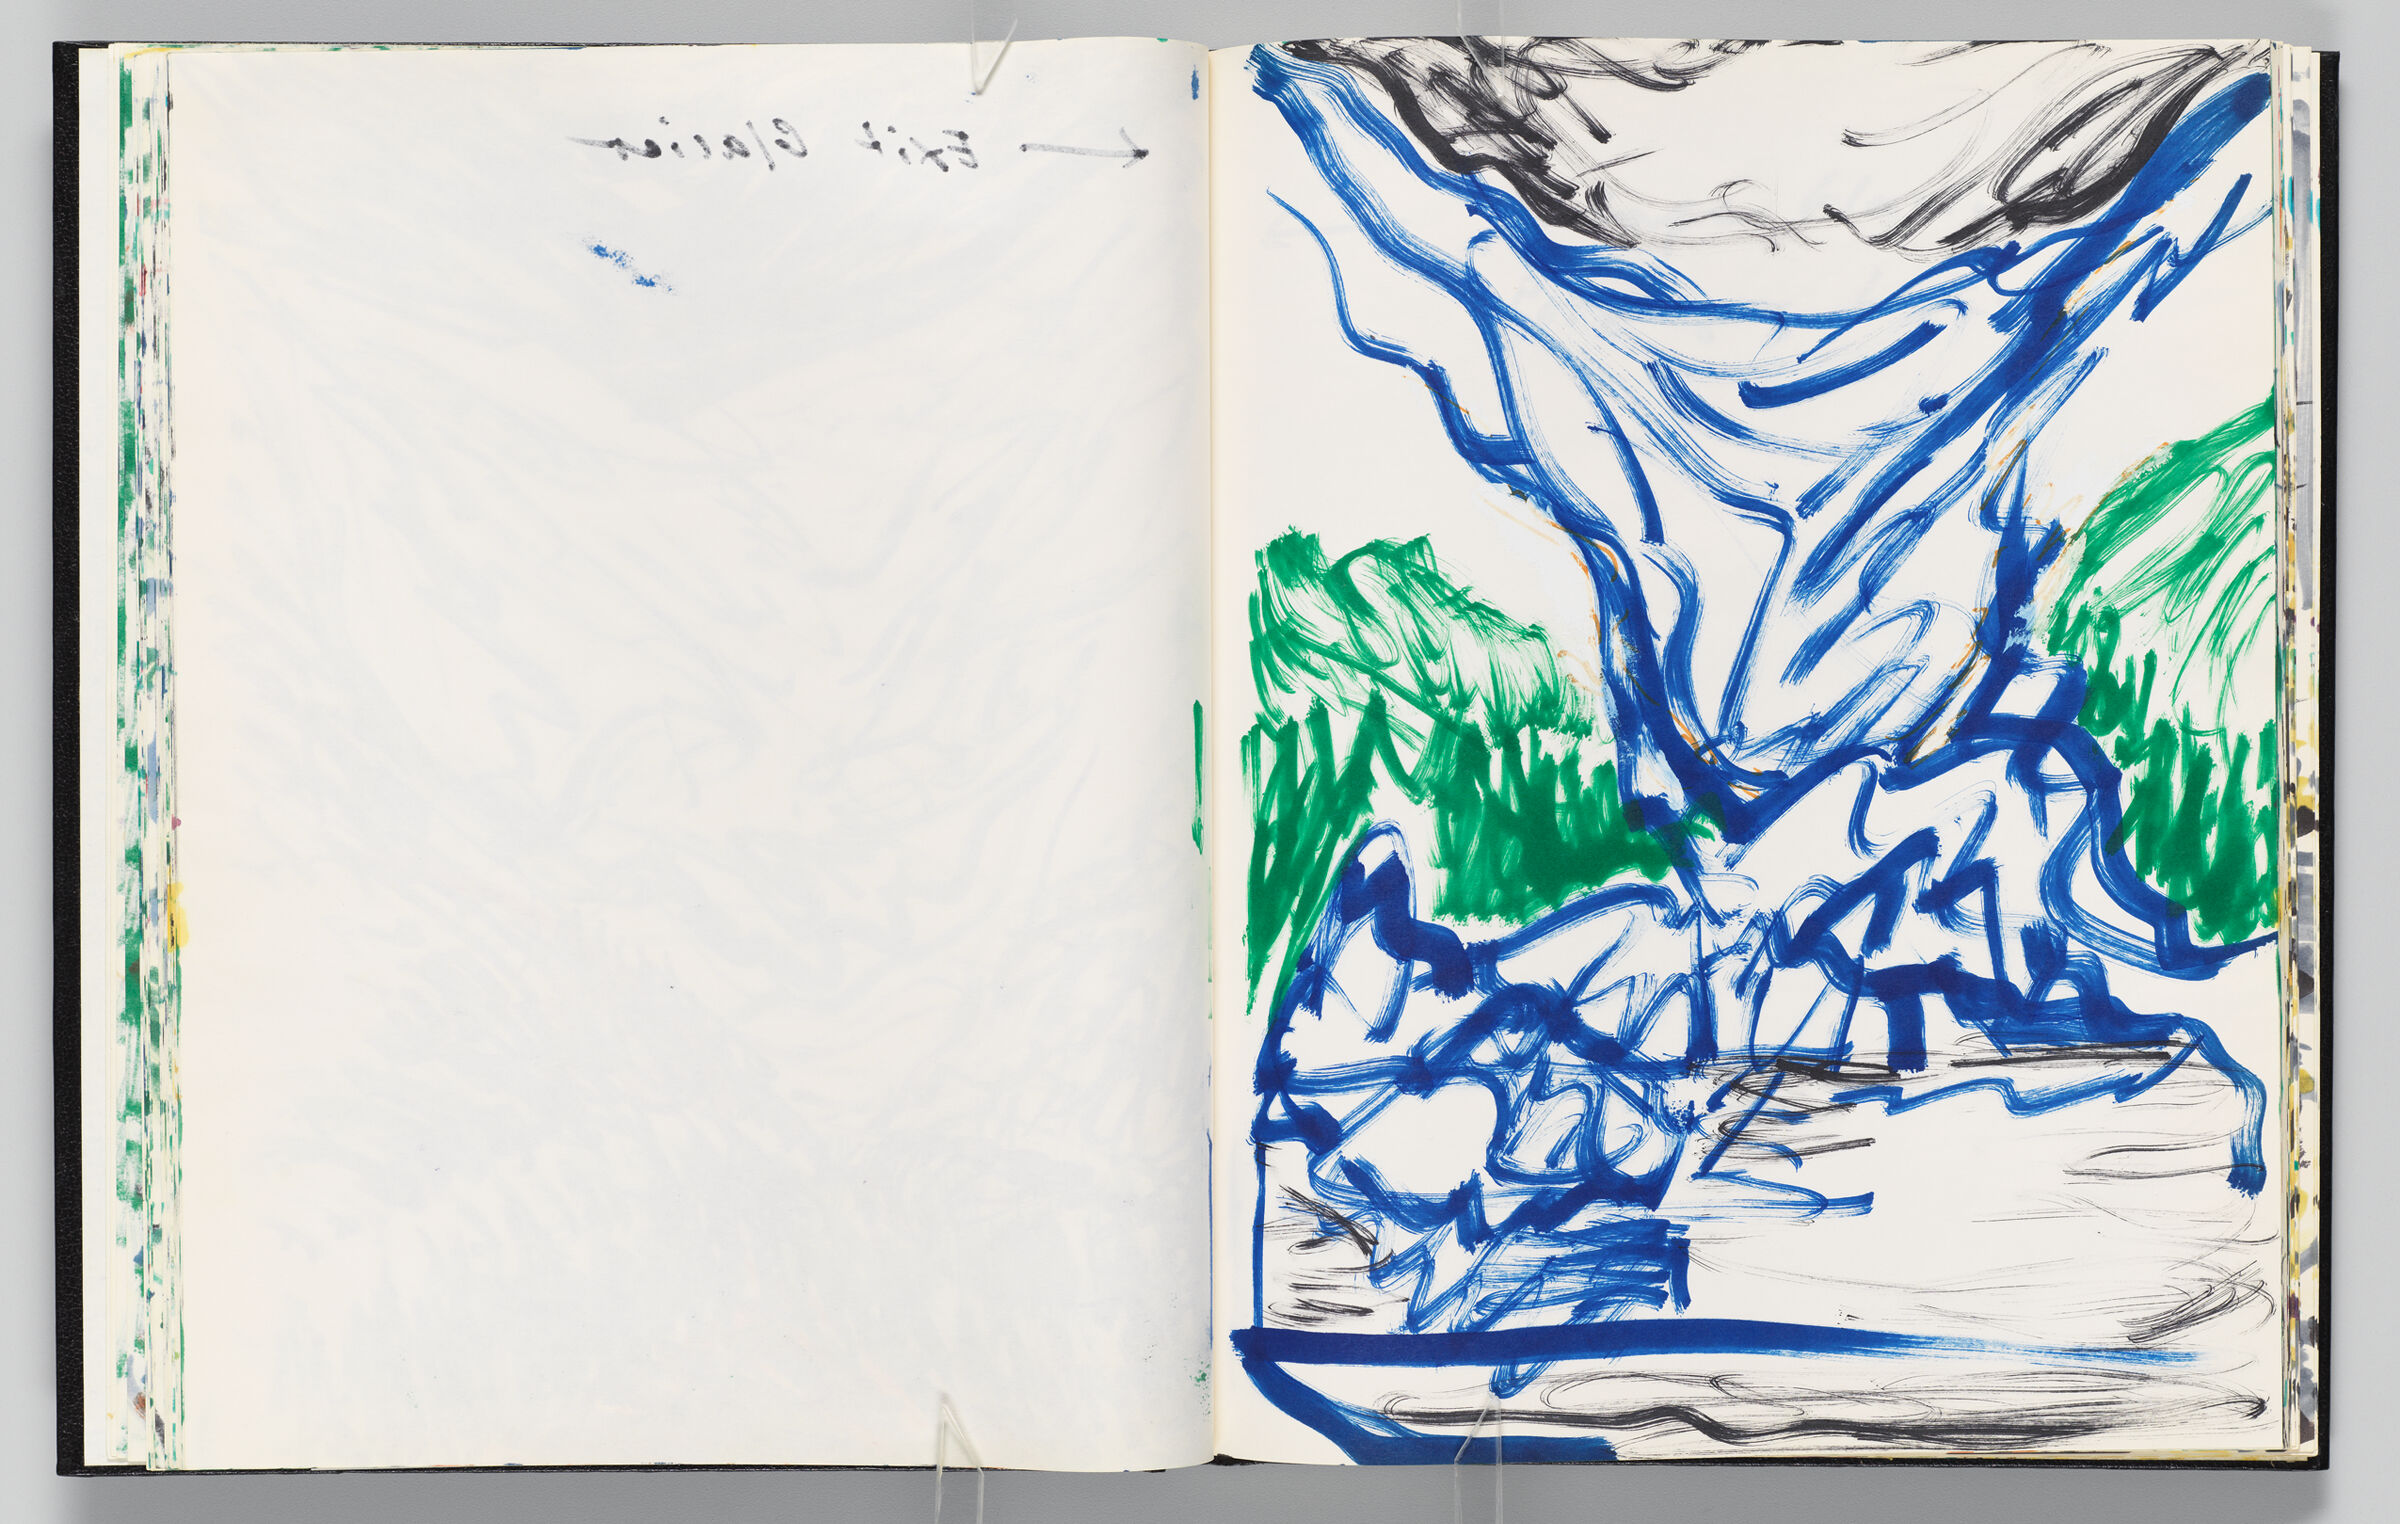 Untitled (Bleed-Through Of Previous Page, Left Page); Untitled (Alasakan Landscape, Right Page)